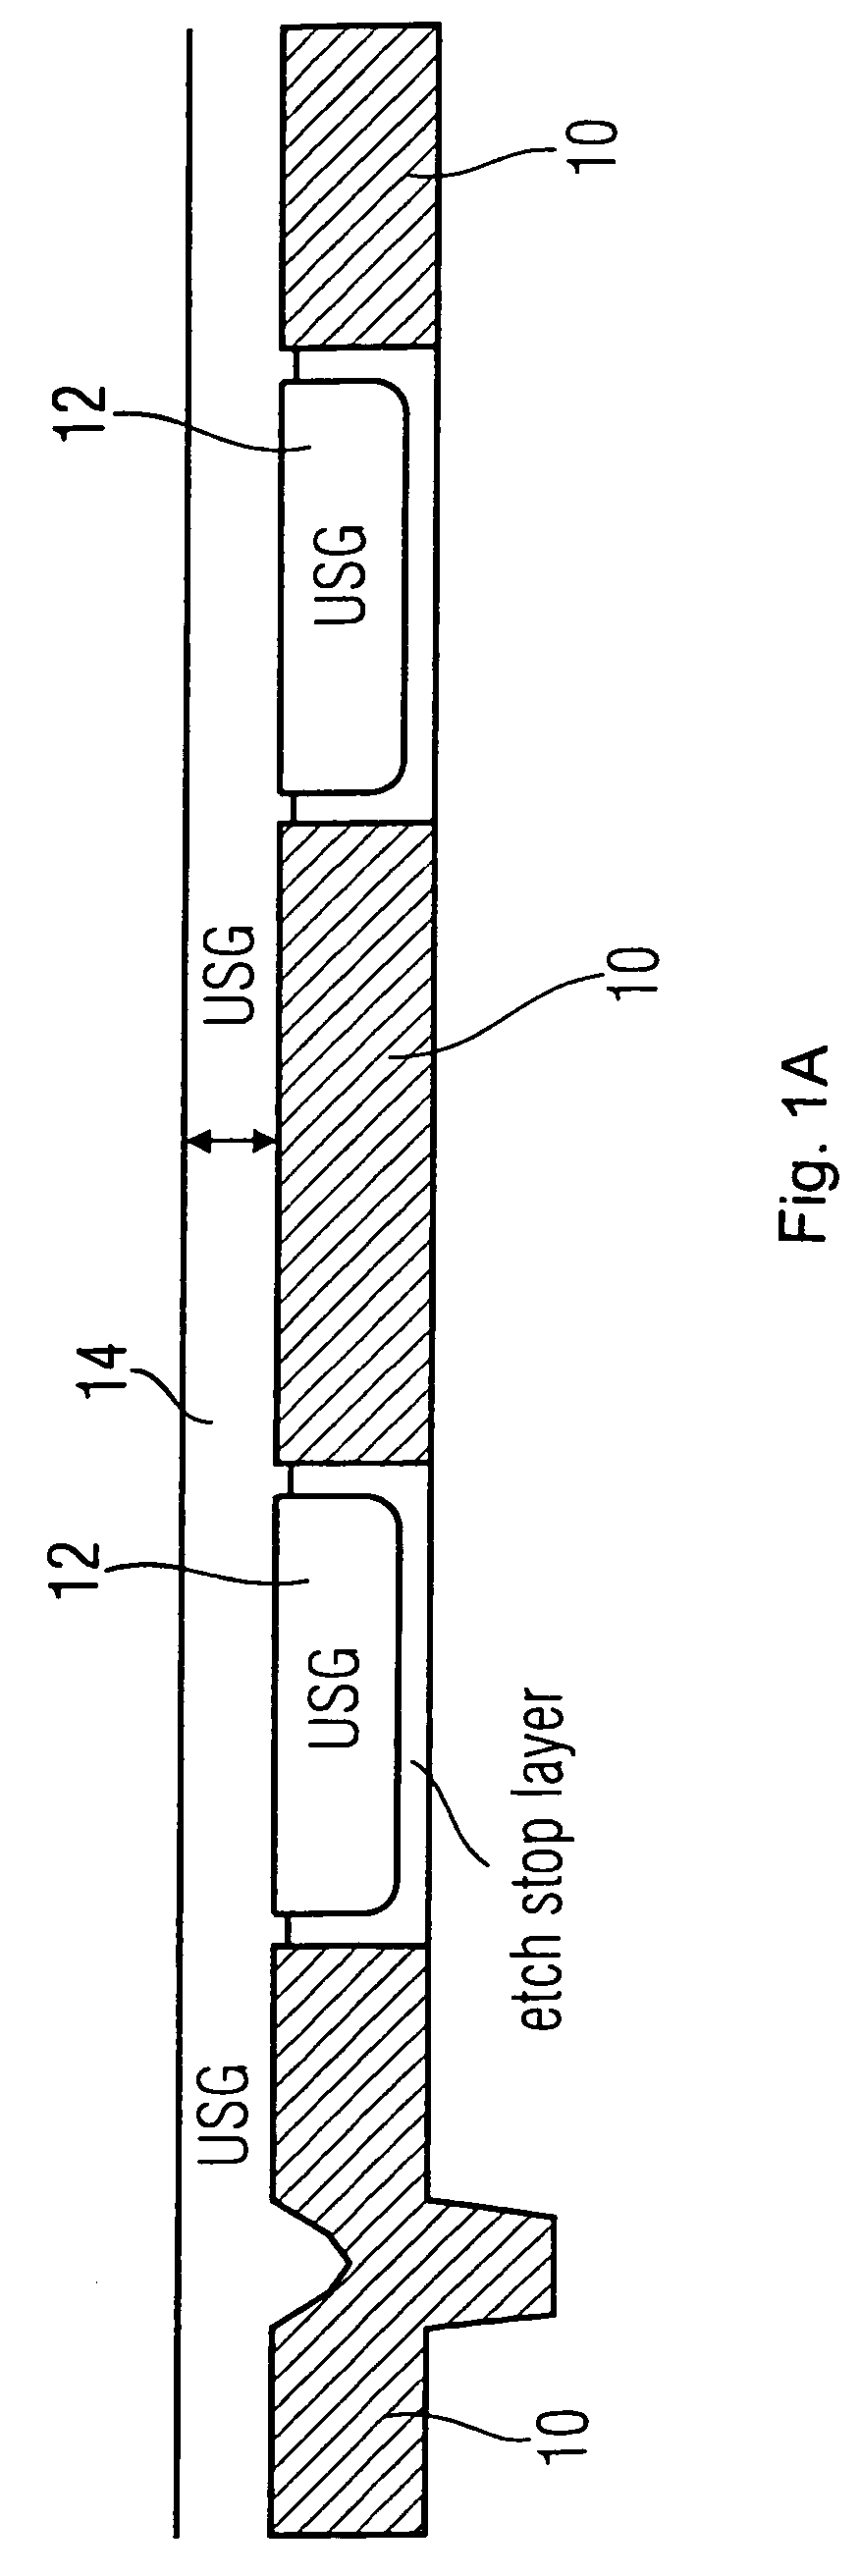 Method of producing a device with a movable portion